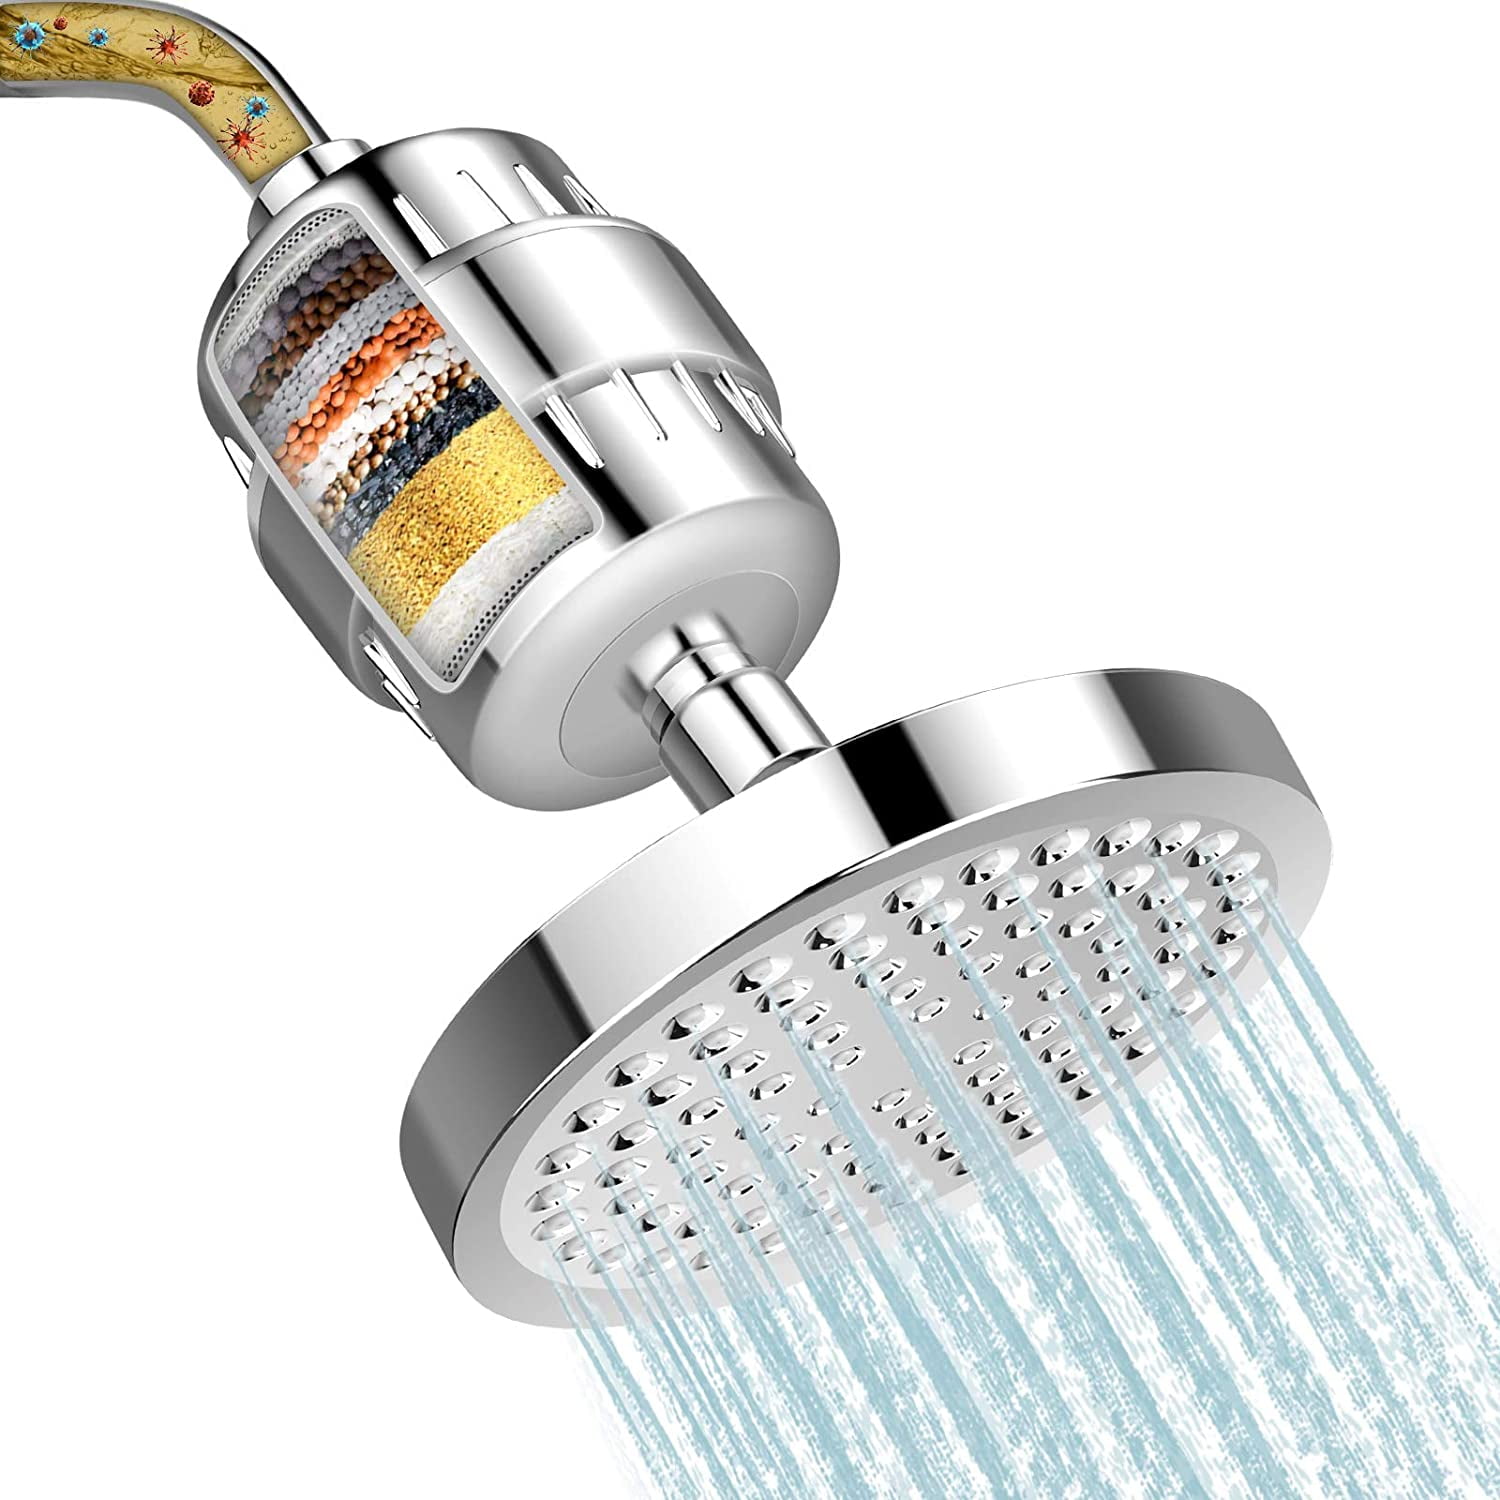 WiseWater Handheld Shower Head with 18 Stage Filter for Hard Water